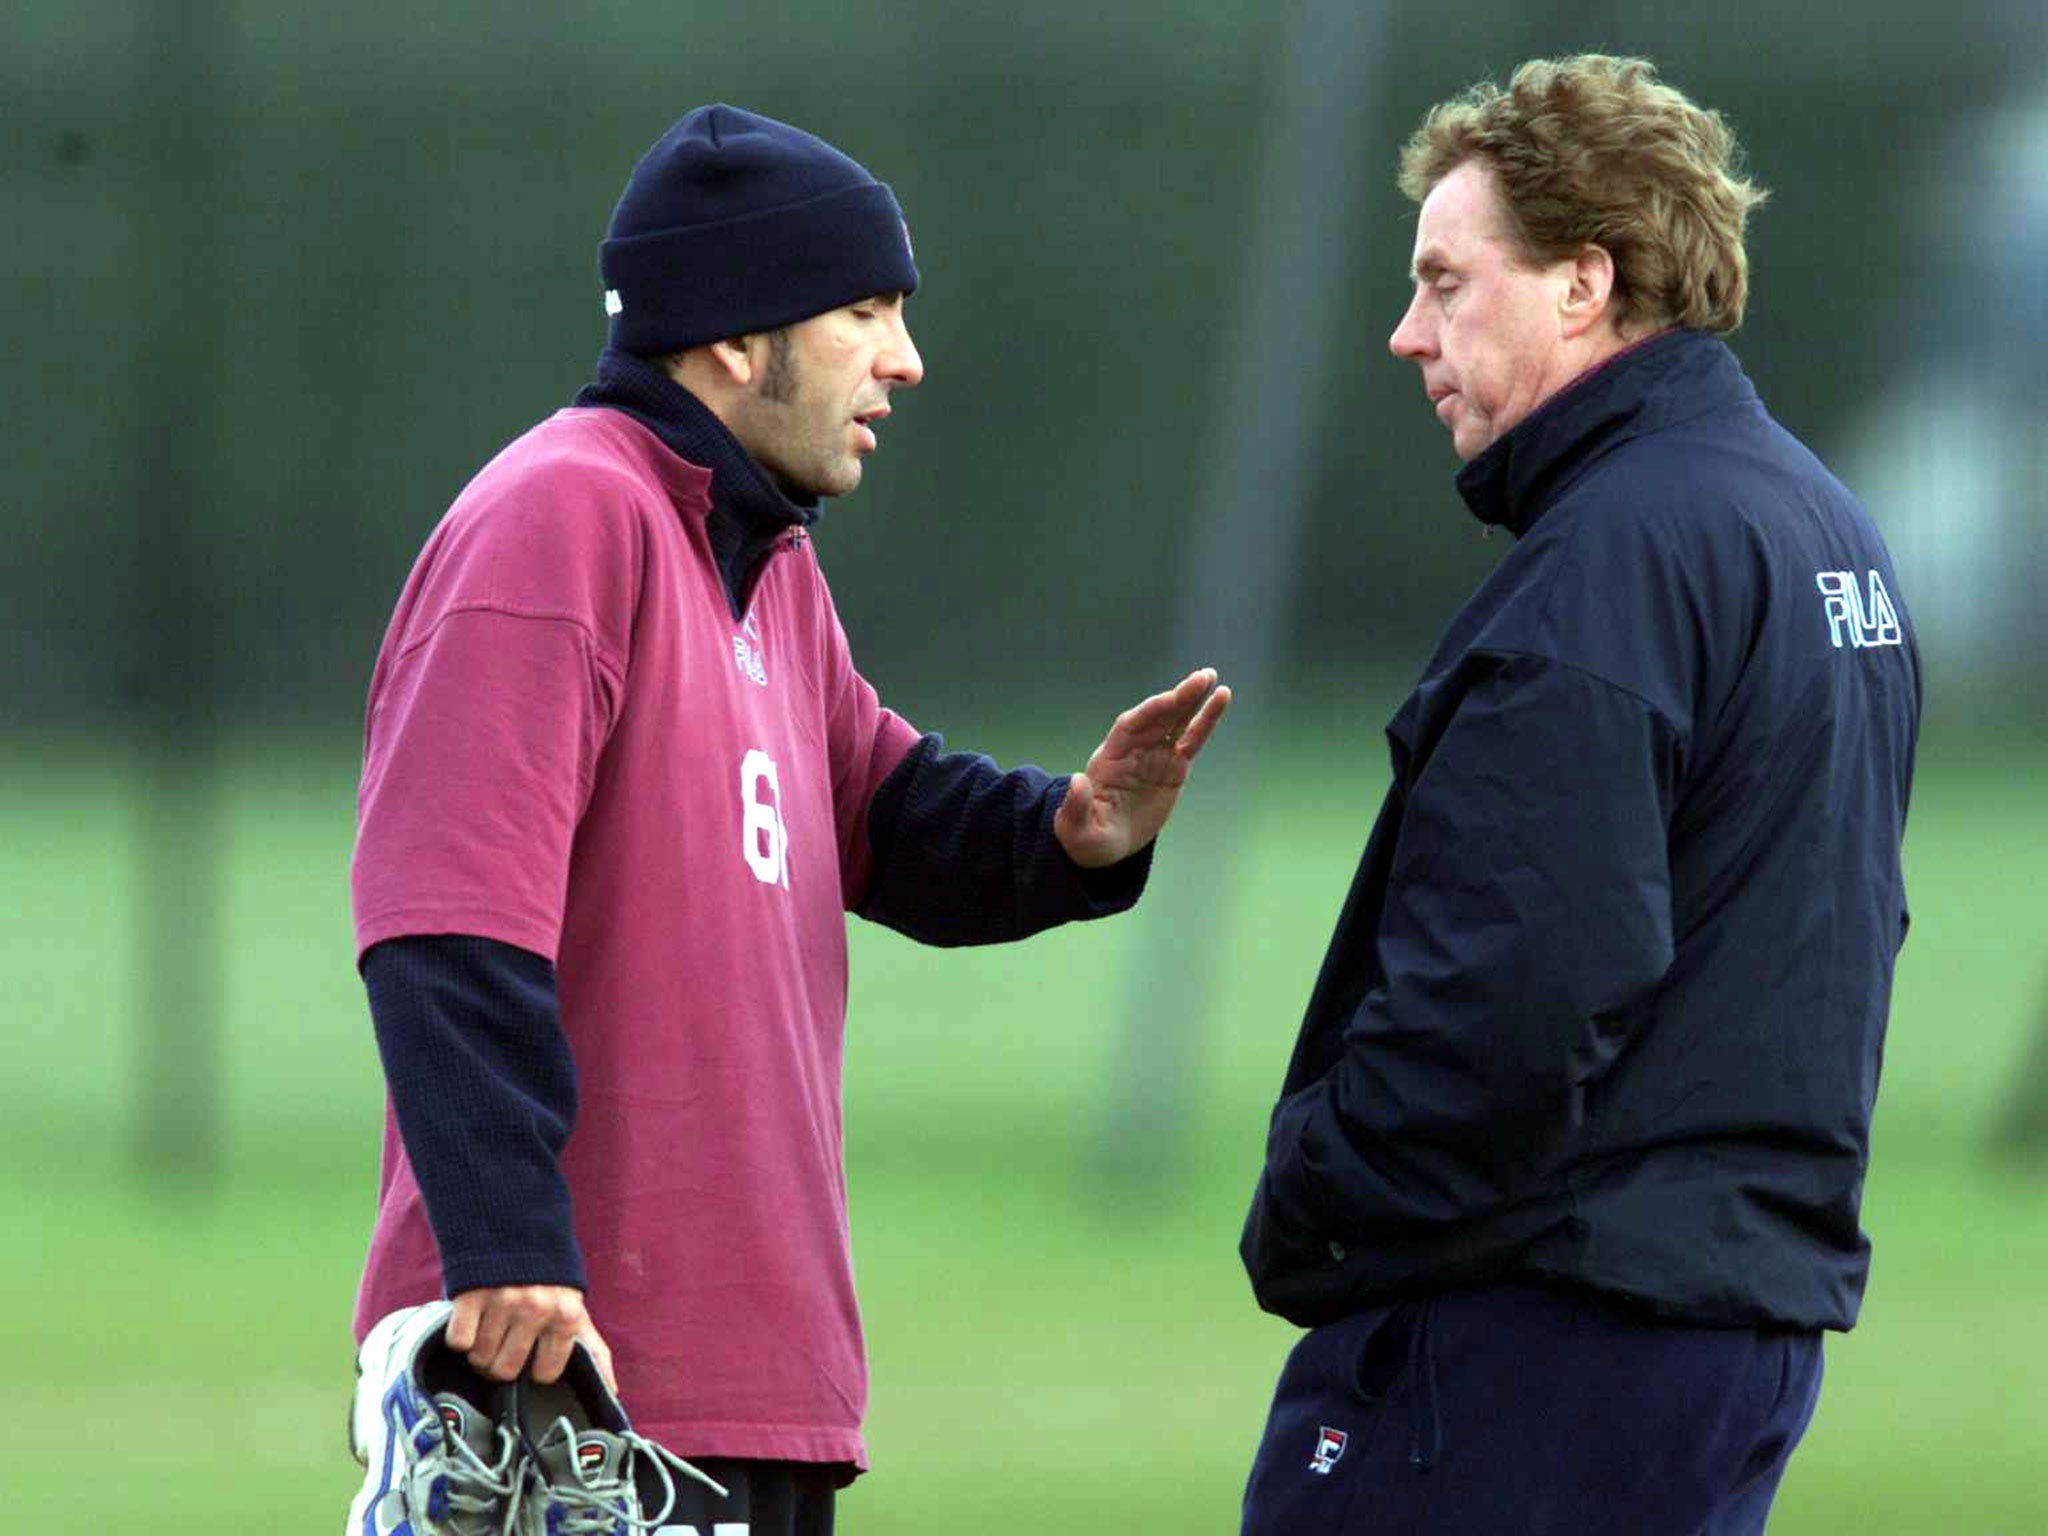 Paolo Di Canio (left) and Harry Redknapp during West Ham training